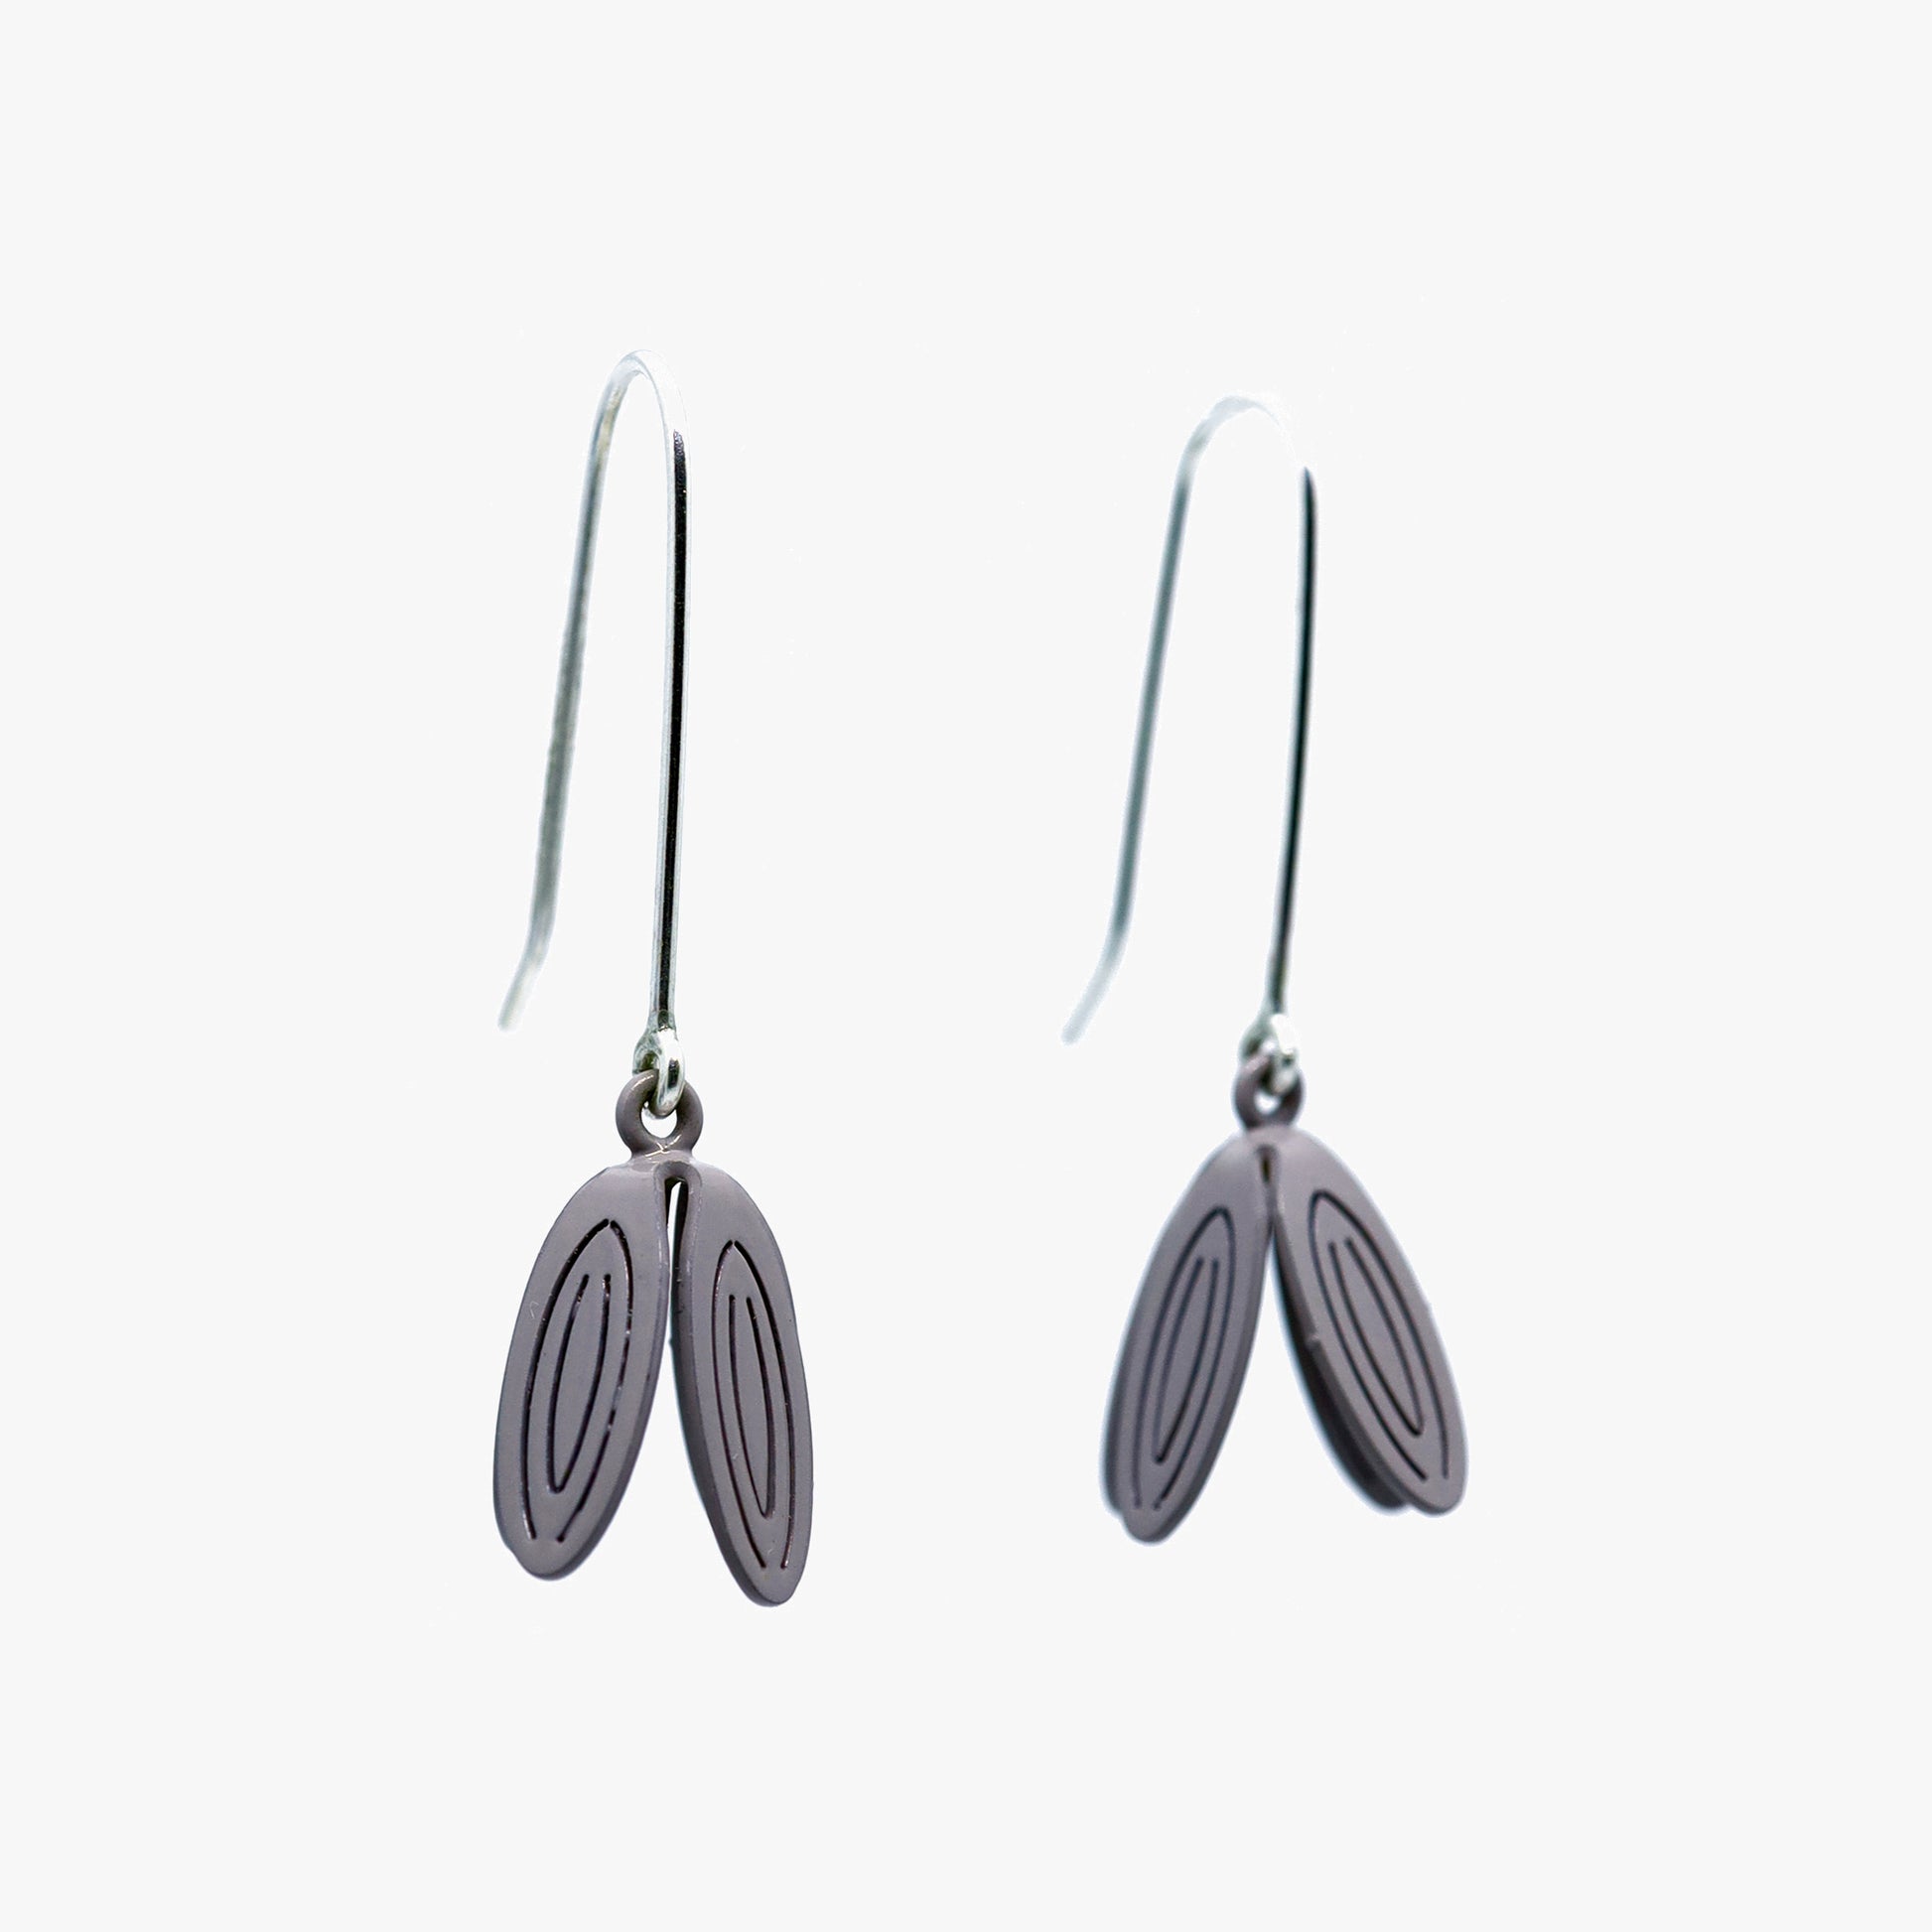 Stunning Petal Drop Earrings by Sorrel Van Allen. Recycled sterling silver and powder-coated brass construction. Intricate laser-cut petals hand-folded for elegant movement. Versatile accessory for casual or formal wear. 